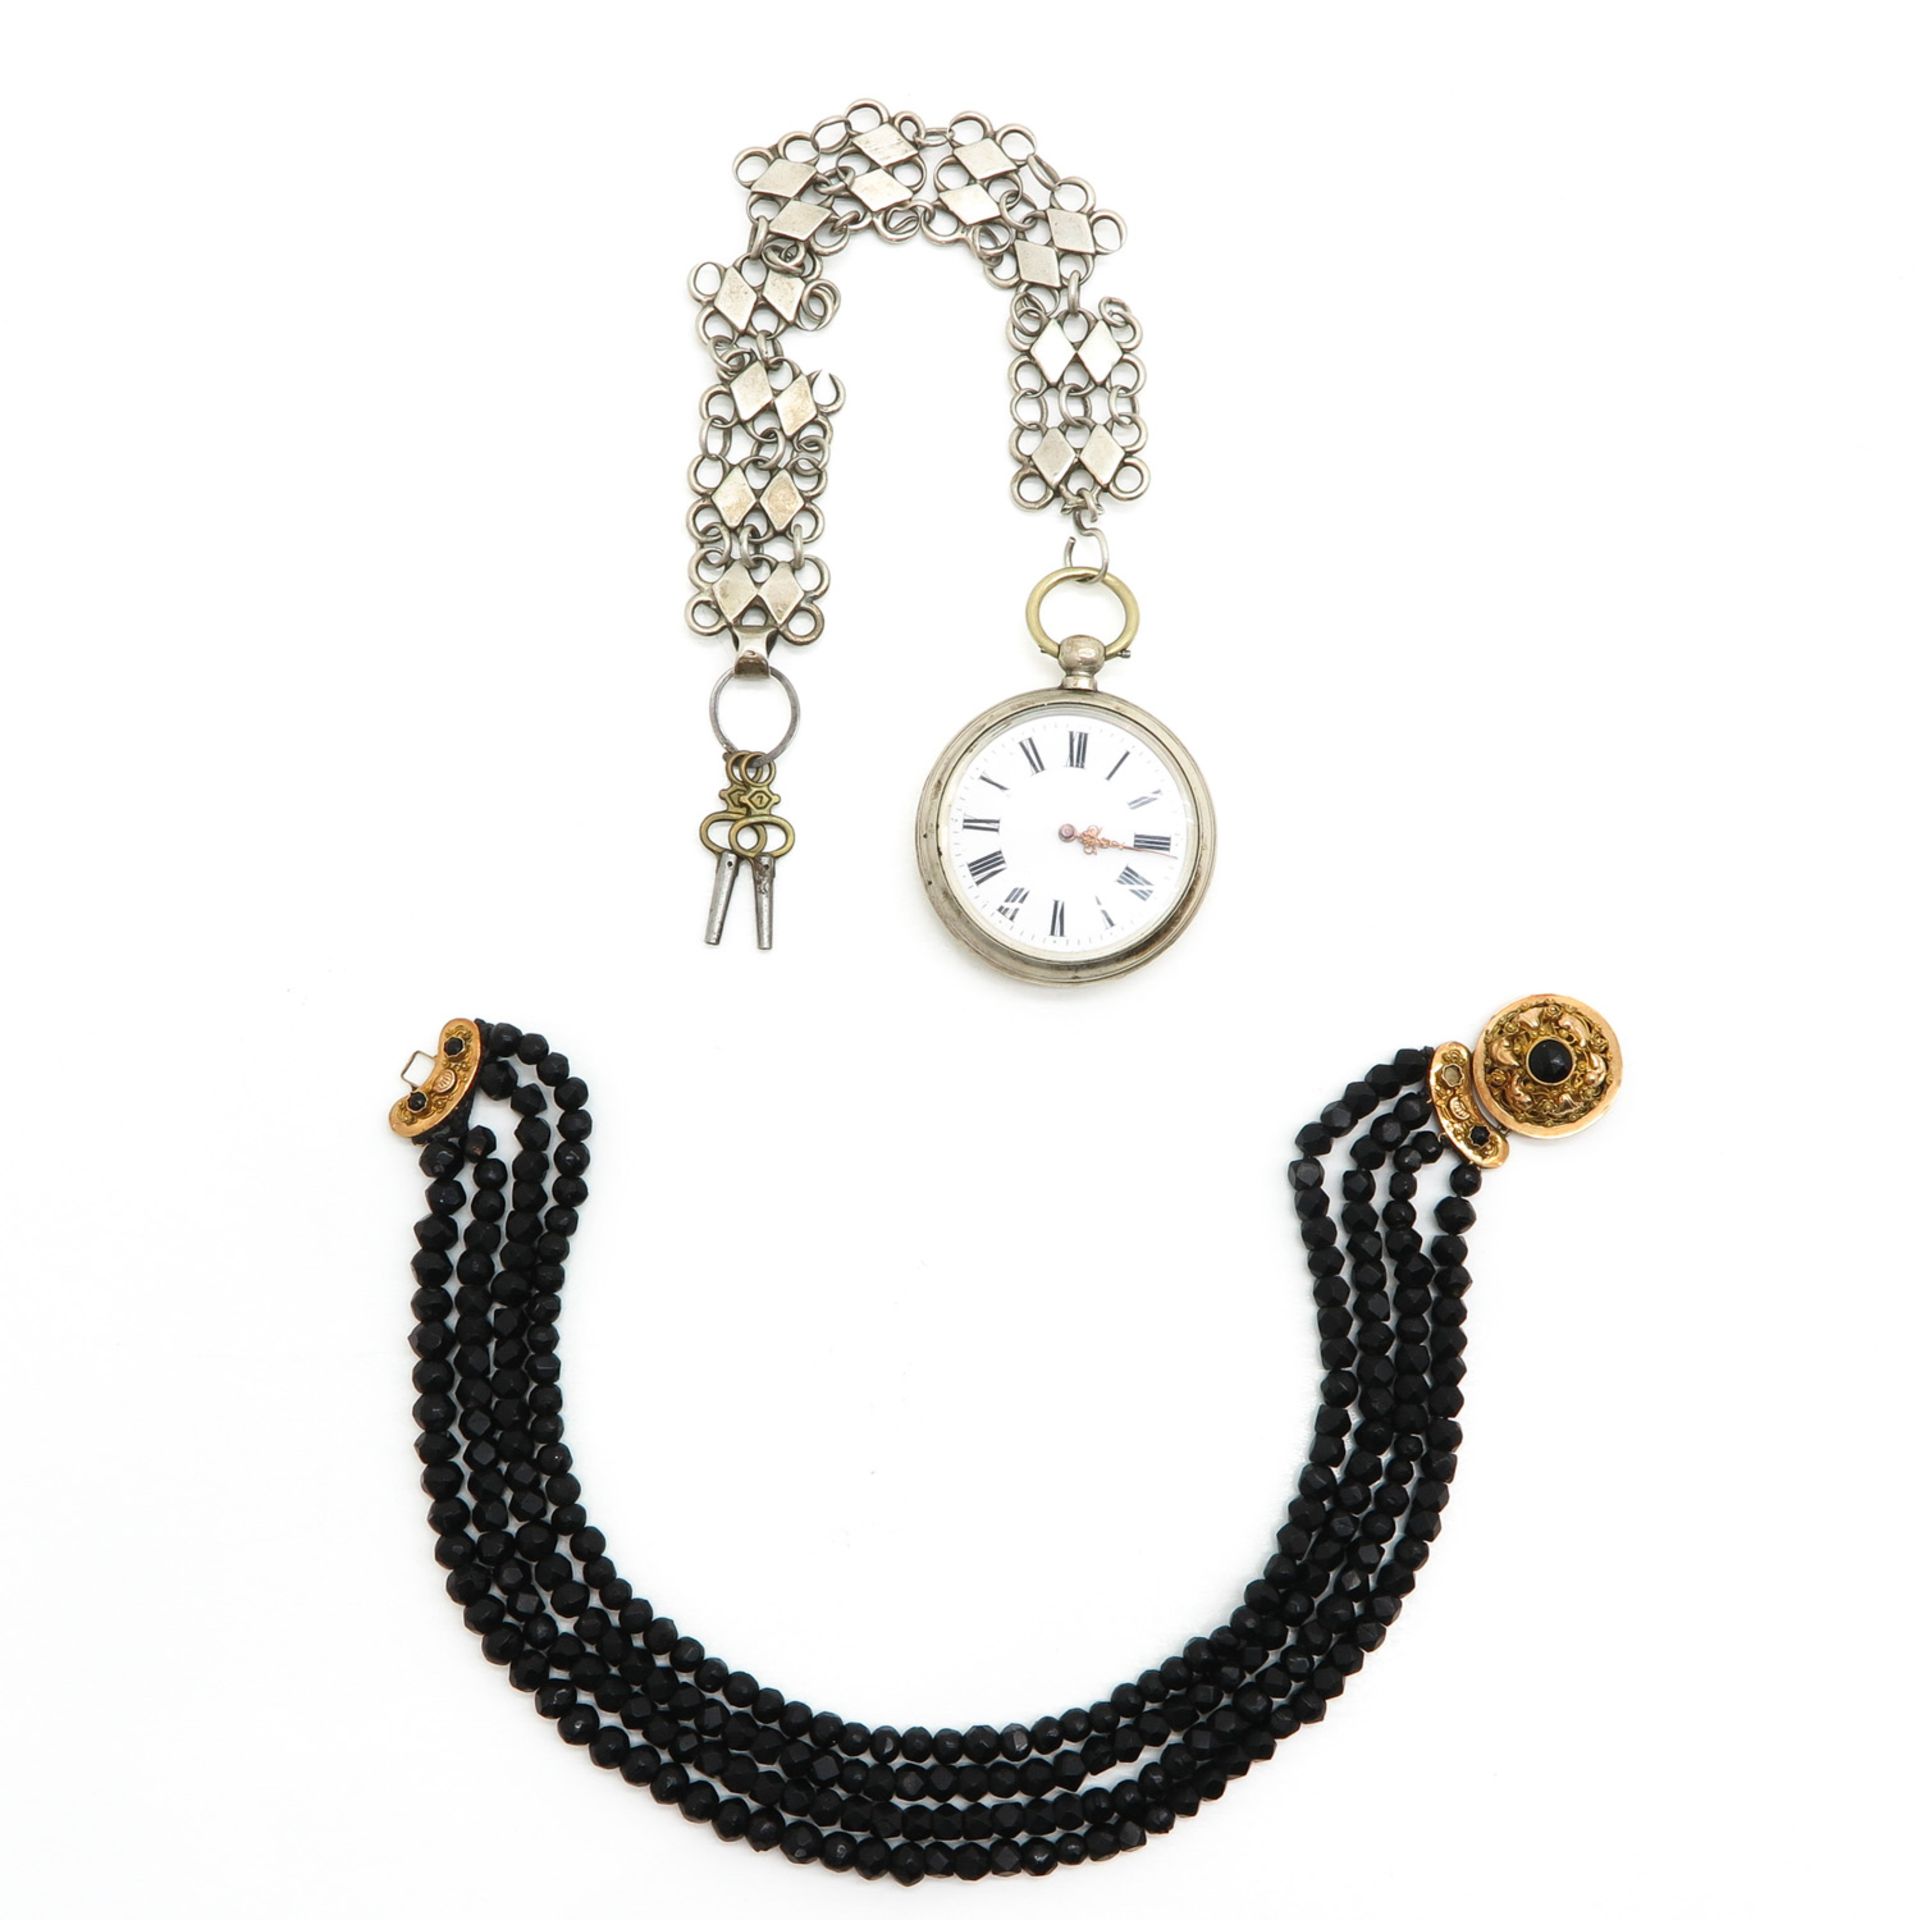 A Silver Pocket Watch and Jet Necklace on Gold Clasp